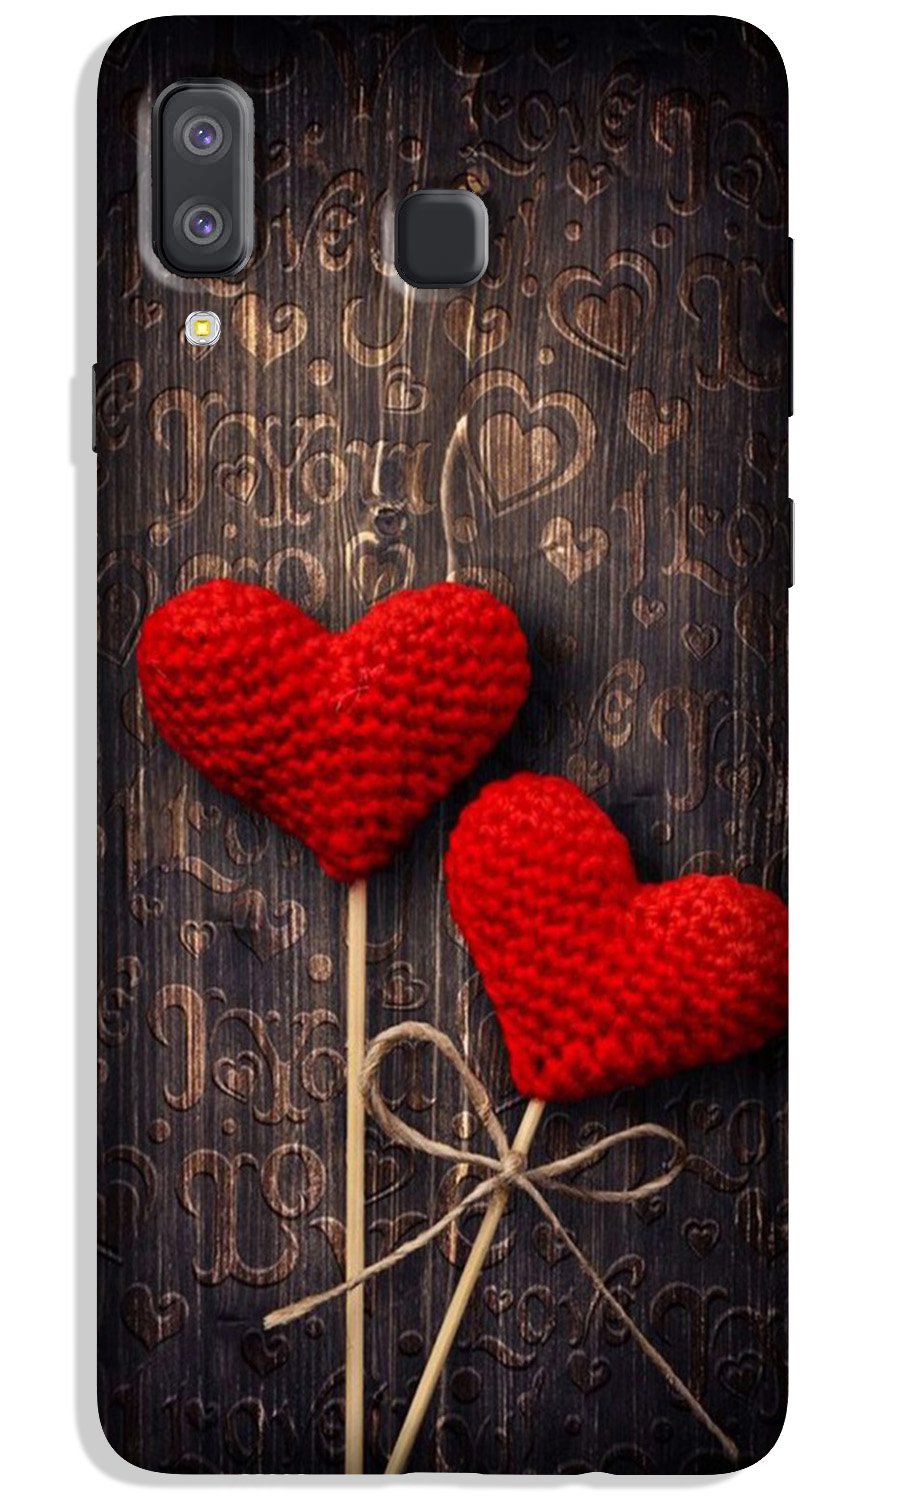 Red Hearts Case for Galaxy A8 Star